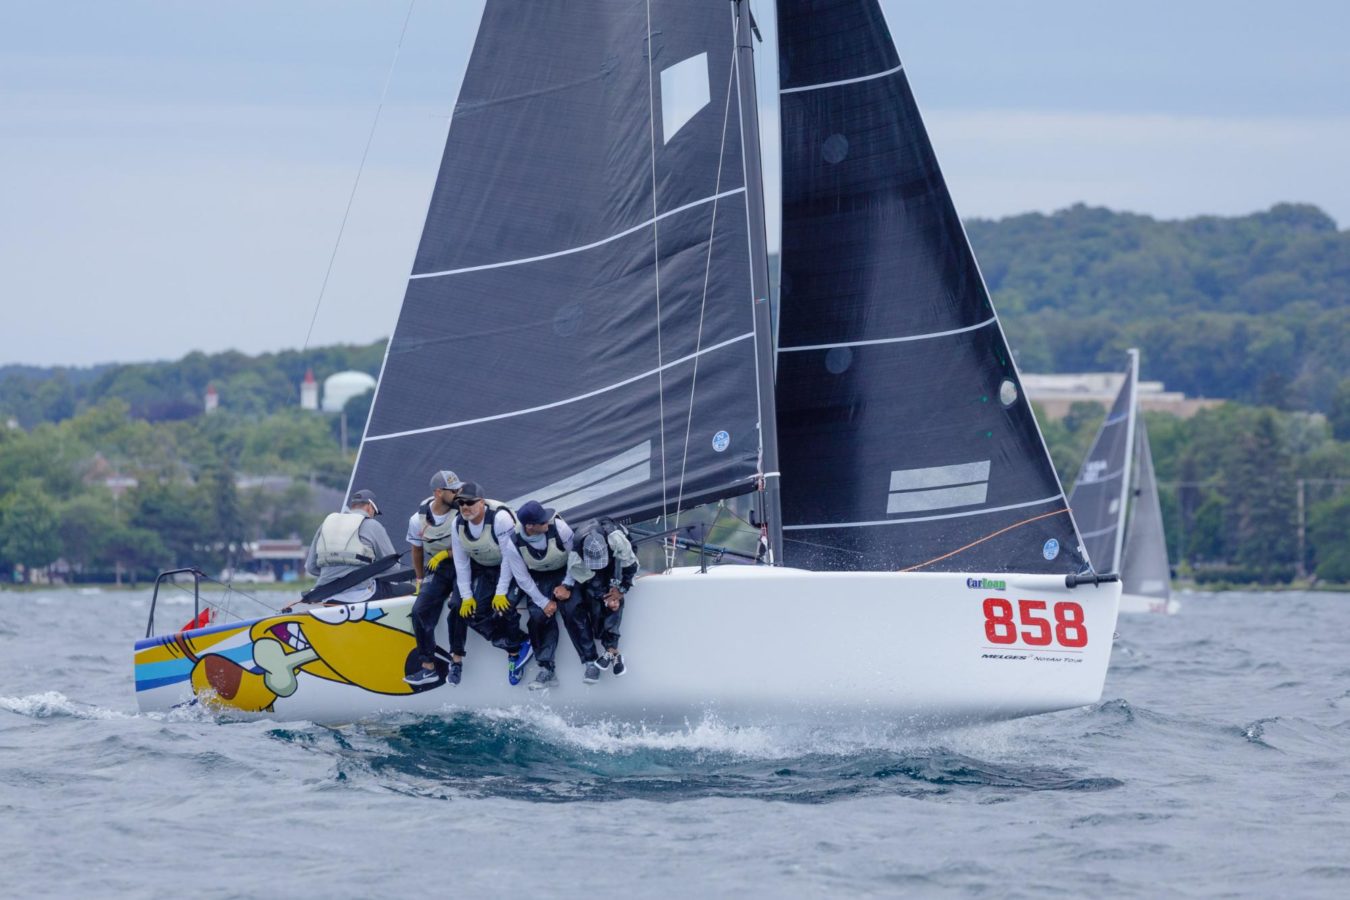 LUCKY DOG WINS MELGES 24 NORTH AMERICANS